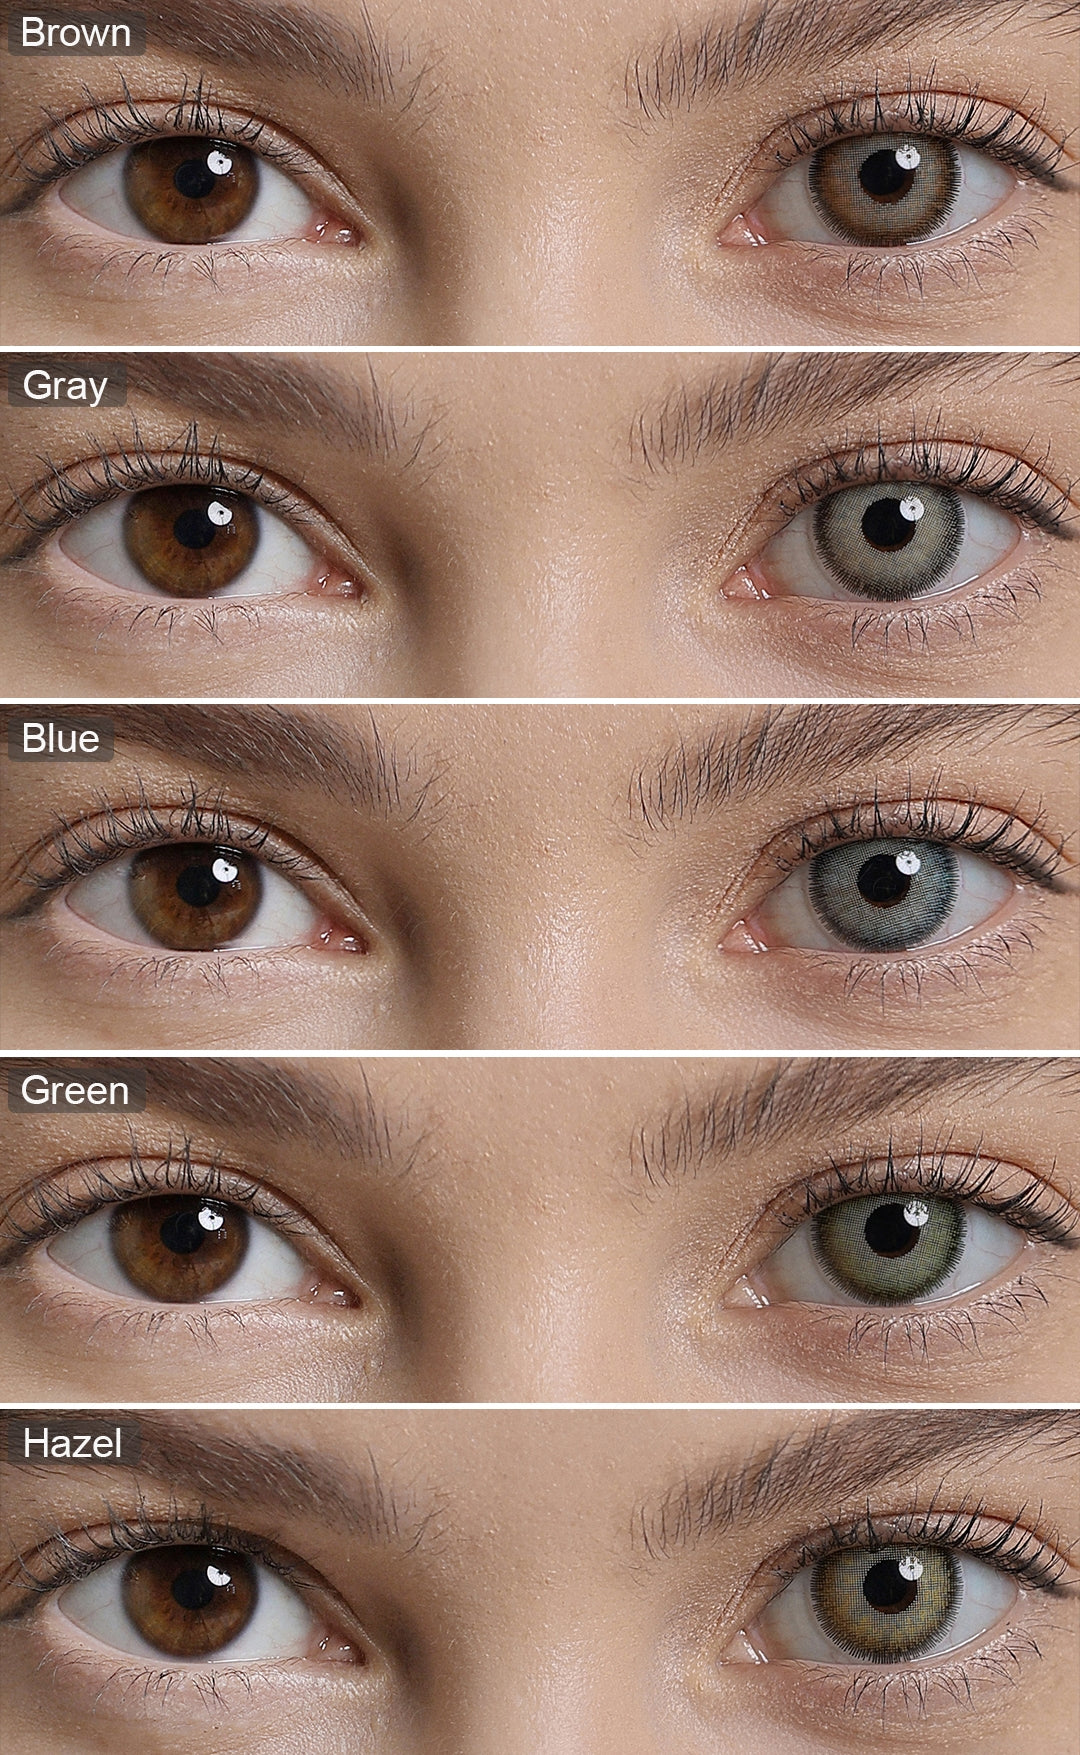 A display of Premium colored contacts in Brown, Gray, Blue, Green and Hazel， each shown both as wearing comparison in a close-up of a model's eye , with the color names labeled on each image.